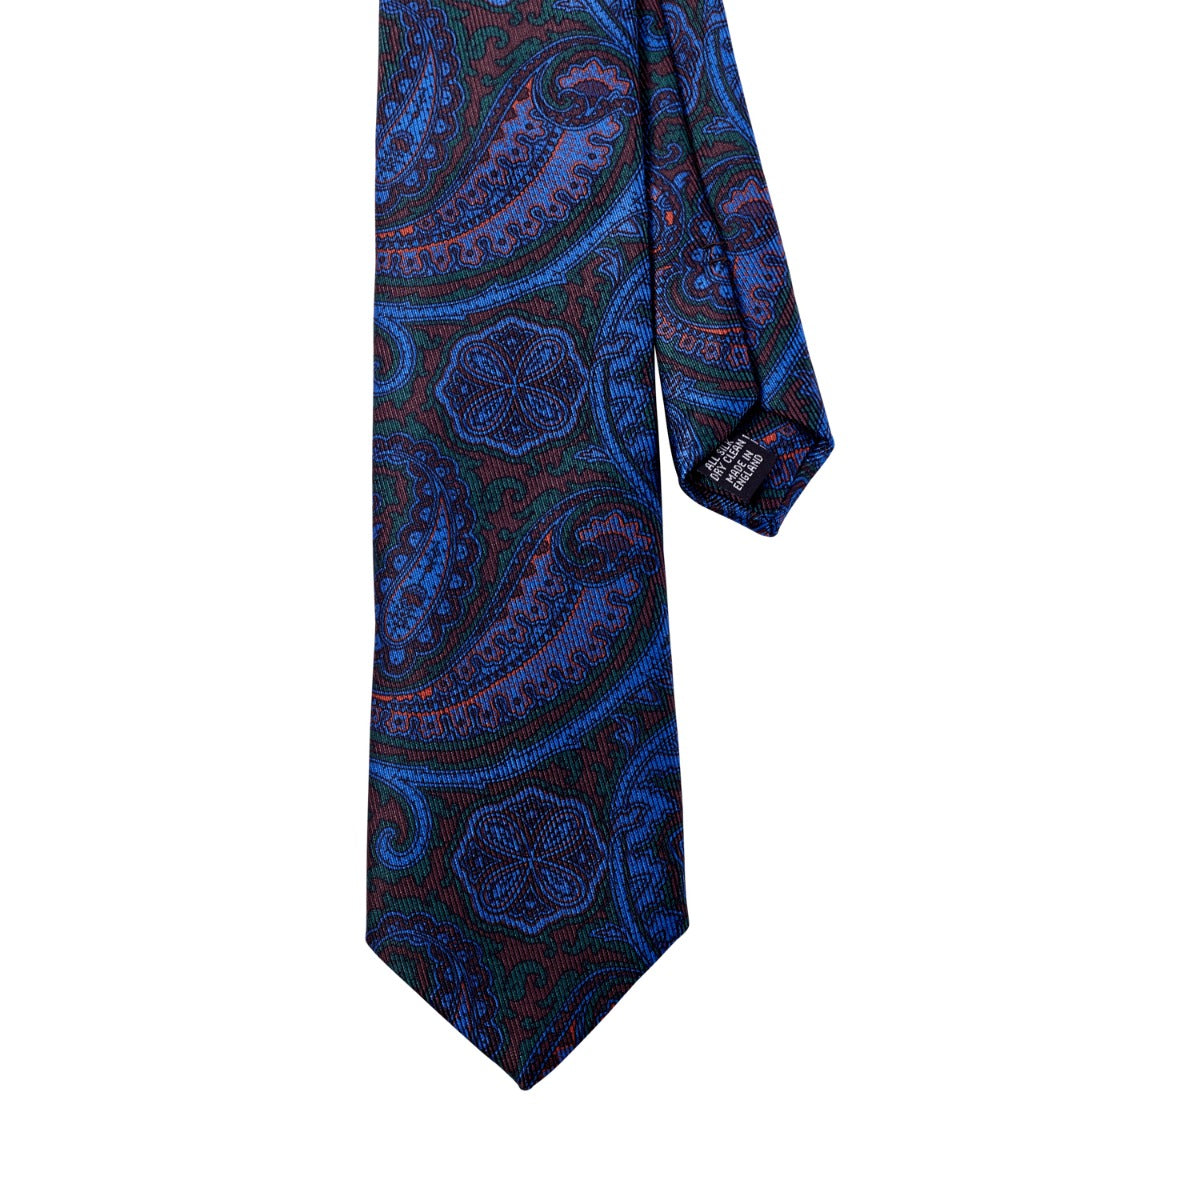 A high-quality Sovereign Grade Navy and Brown Paisley Ancient Madder Silk Tie by KirbyAllison.com on a white background.